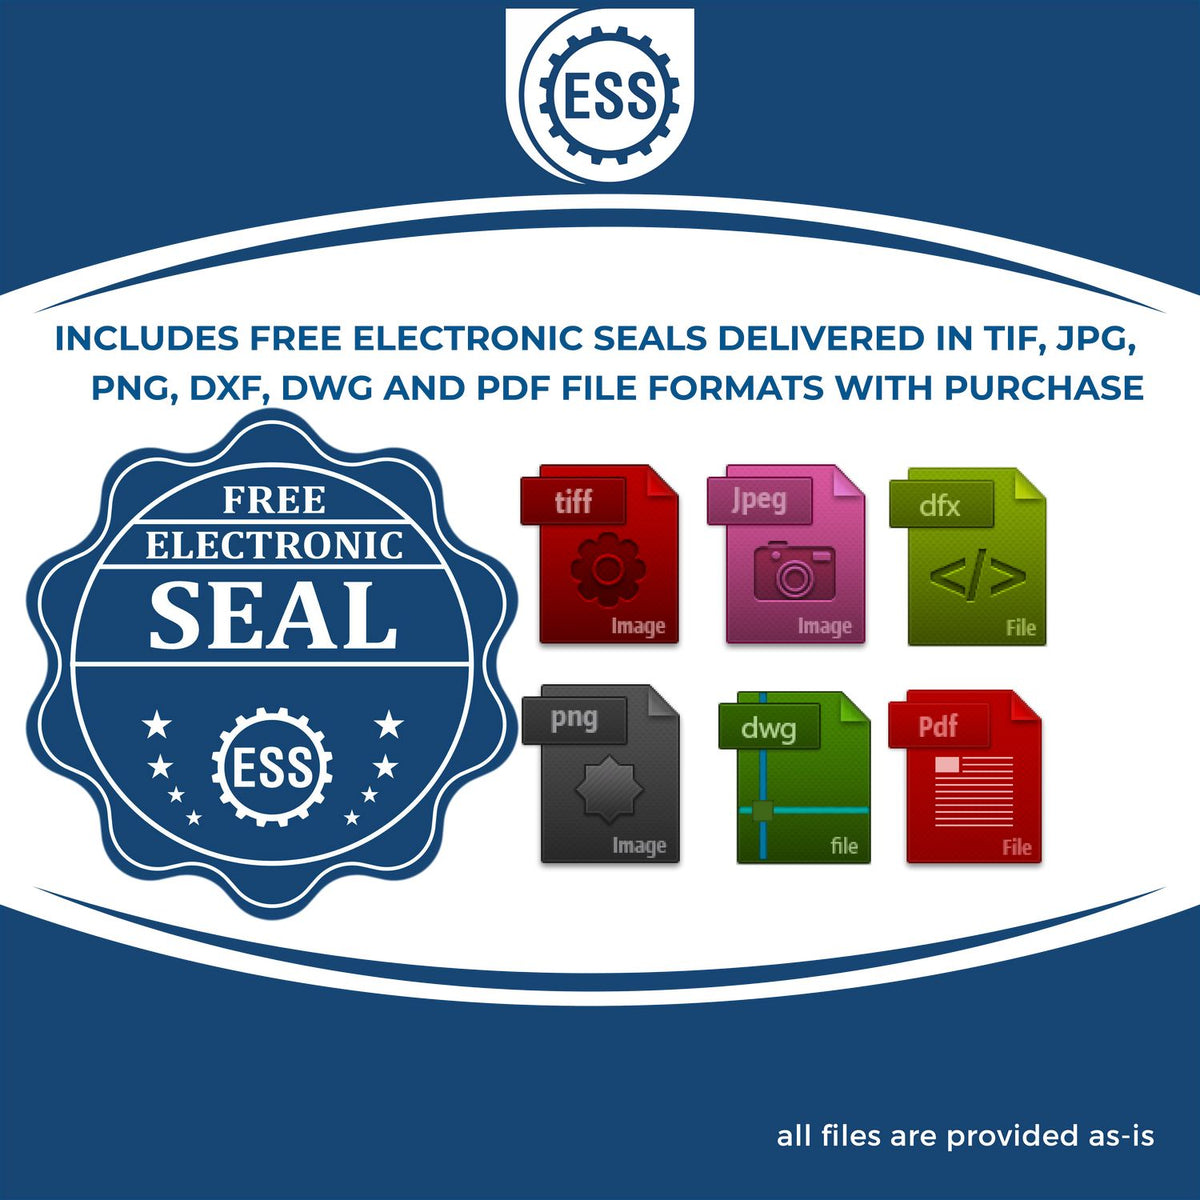 An infographic for the free electronic seal for the Slim Pre-Inked Rectangular Notary Stamp for Colorado illustrating the different file type icons such as DXF, DWG, TIF, JPG and PNG.